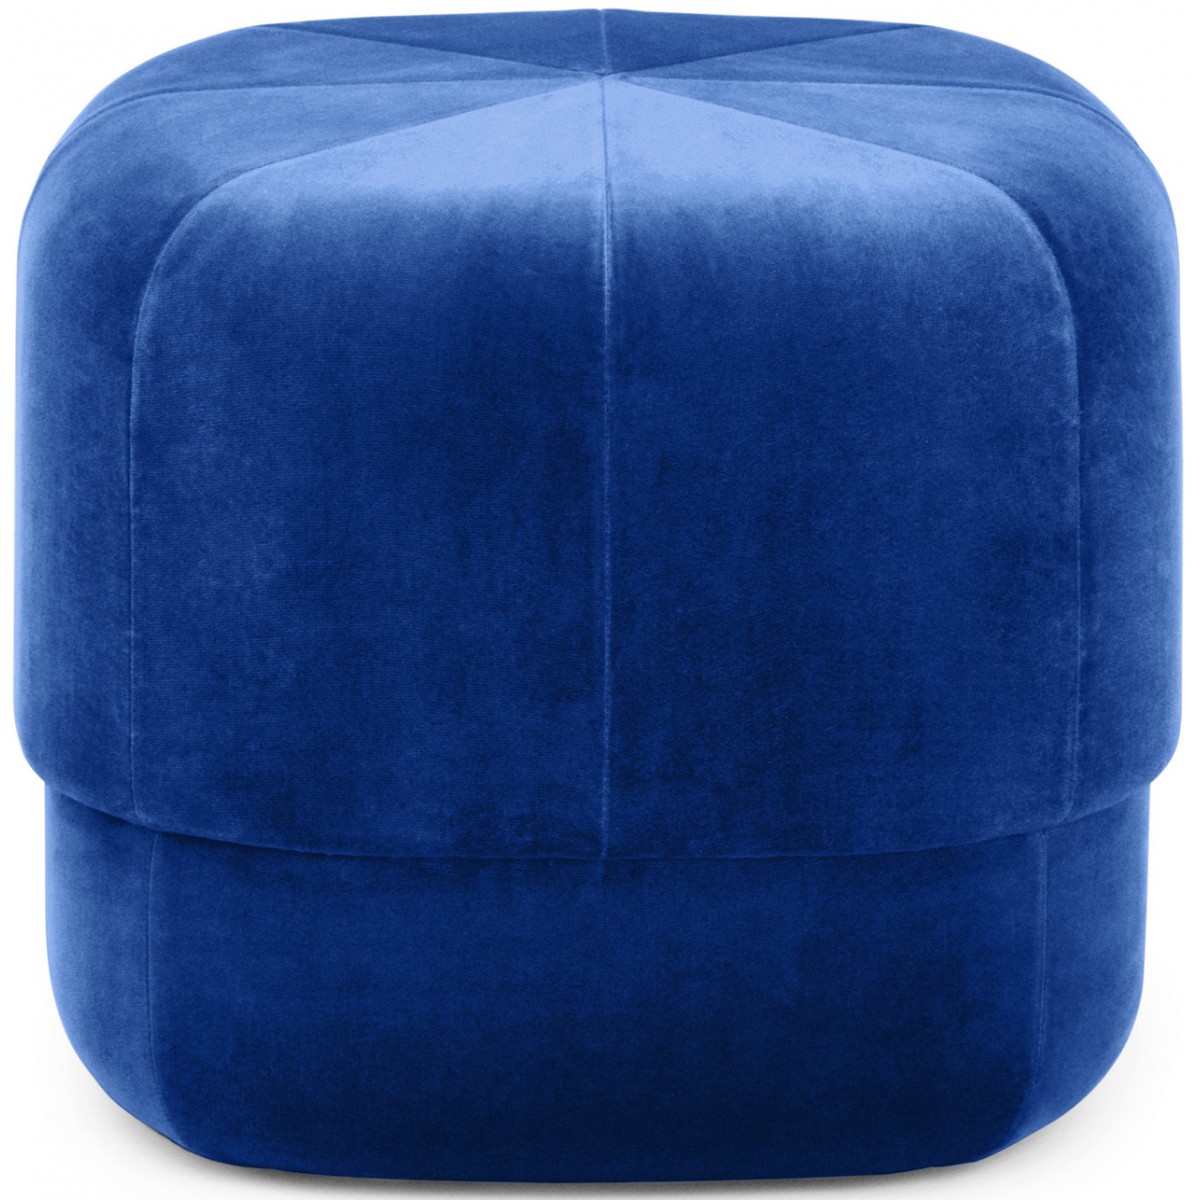 small - electric blue - Circus pouf - 601064